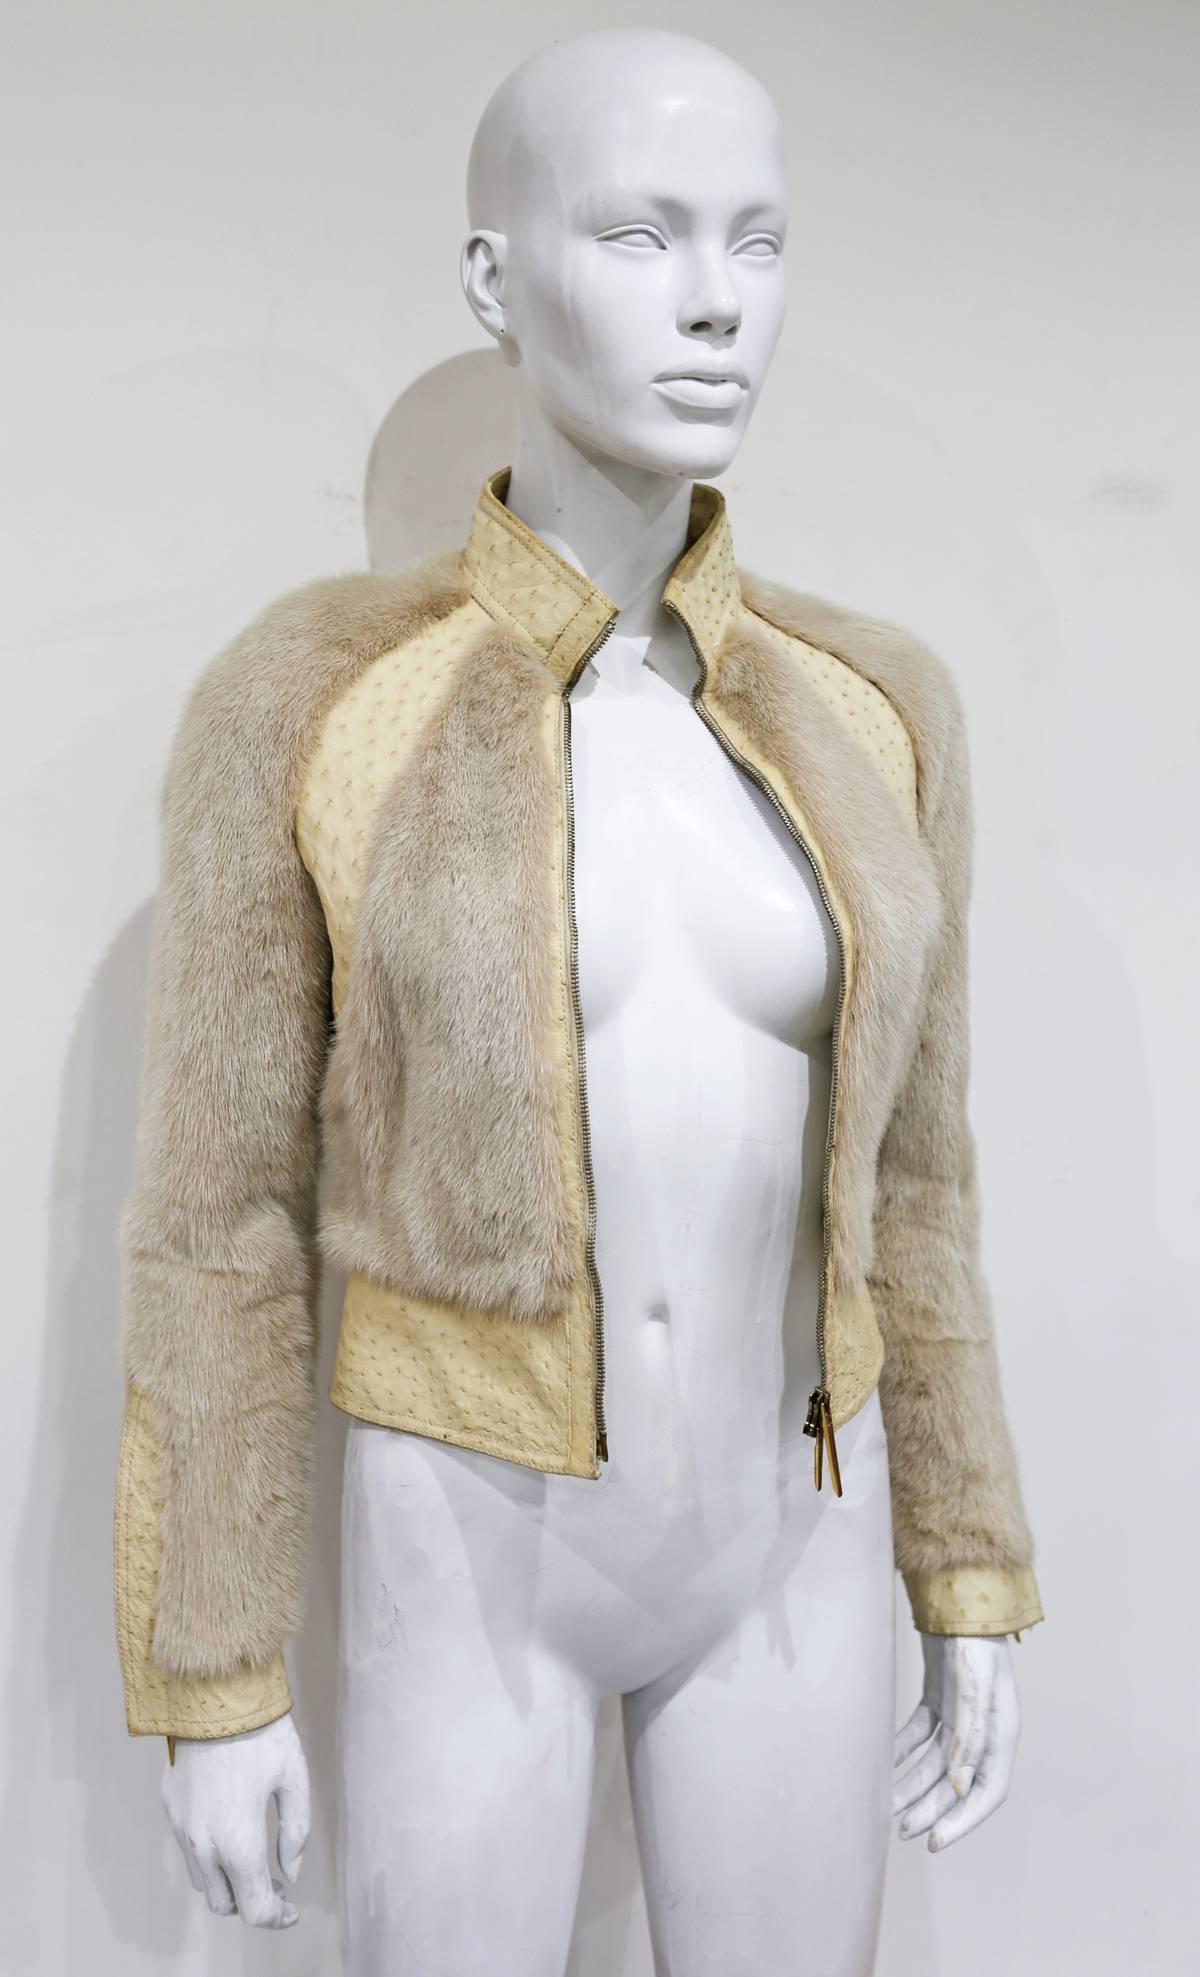 A Gucci Ostrich and Mink fur jacket from the Autumn - Winter 2000 - 2001 season. The jacket was designed by Tom Ford, only one was made as it was a sample for the runway show. 

Sample Size - XS - Fr 34 / It 38